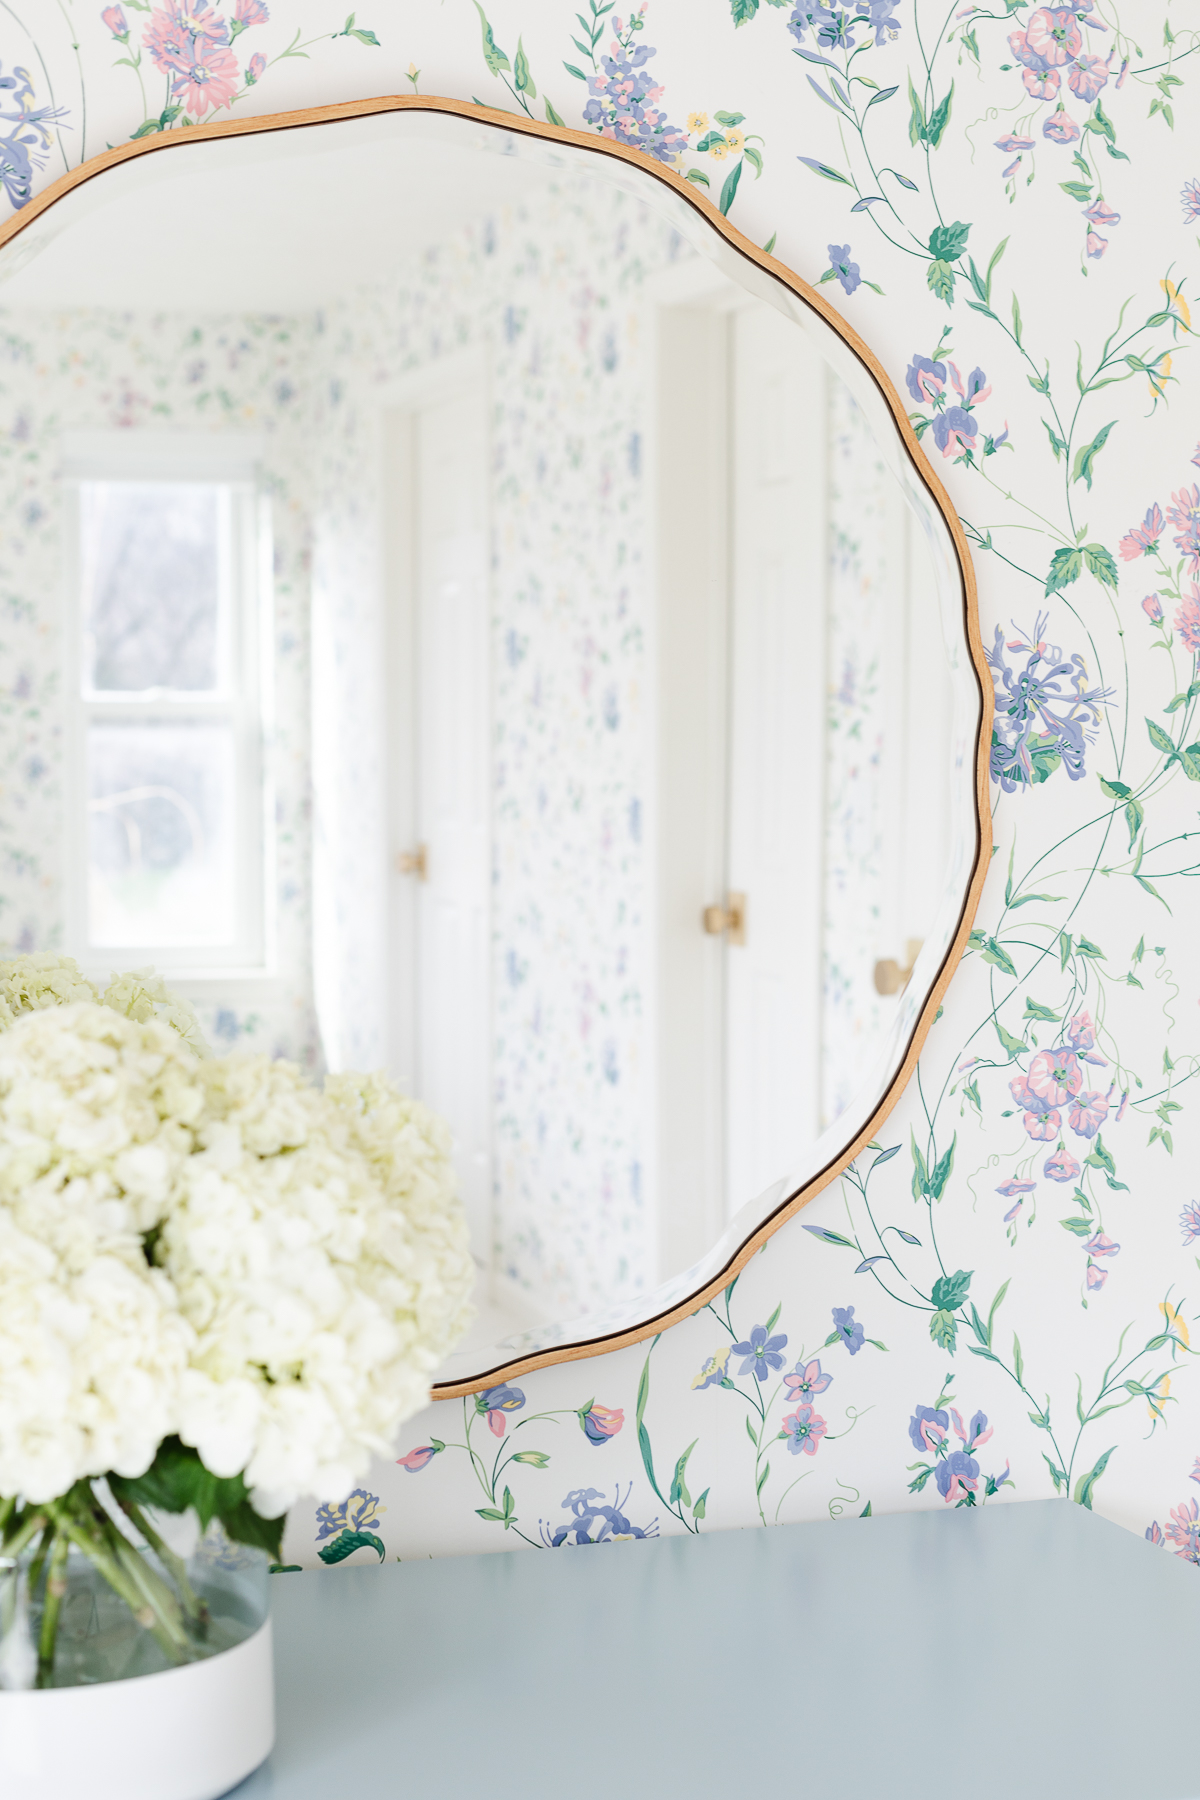 A guest bedroom with a wavy mirror and flowers on top of a blue dresser.